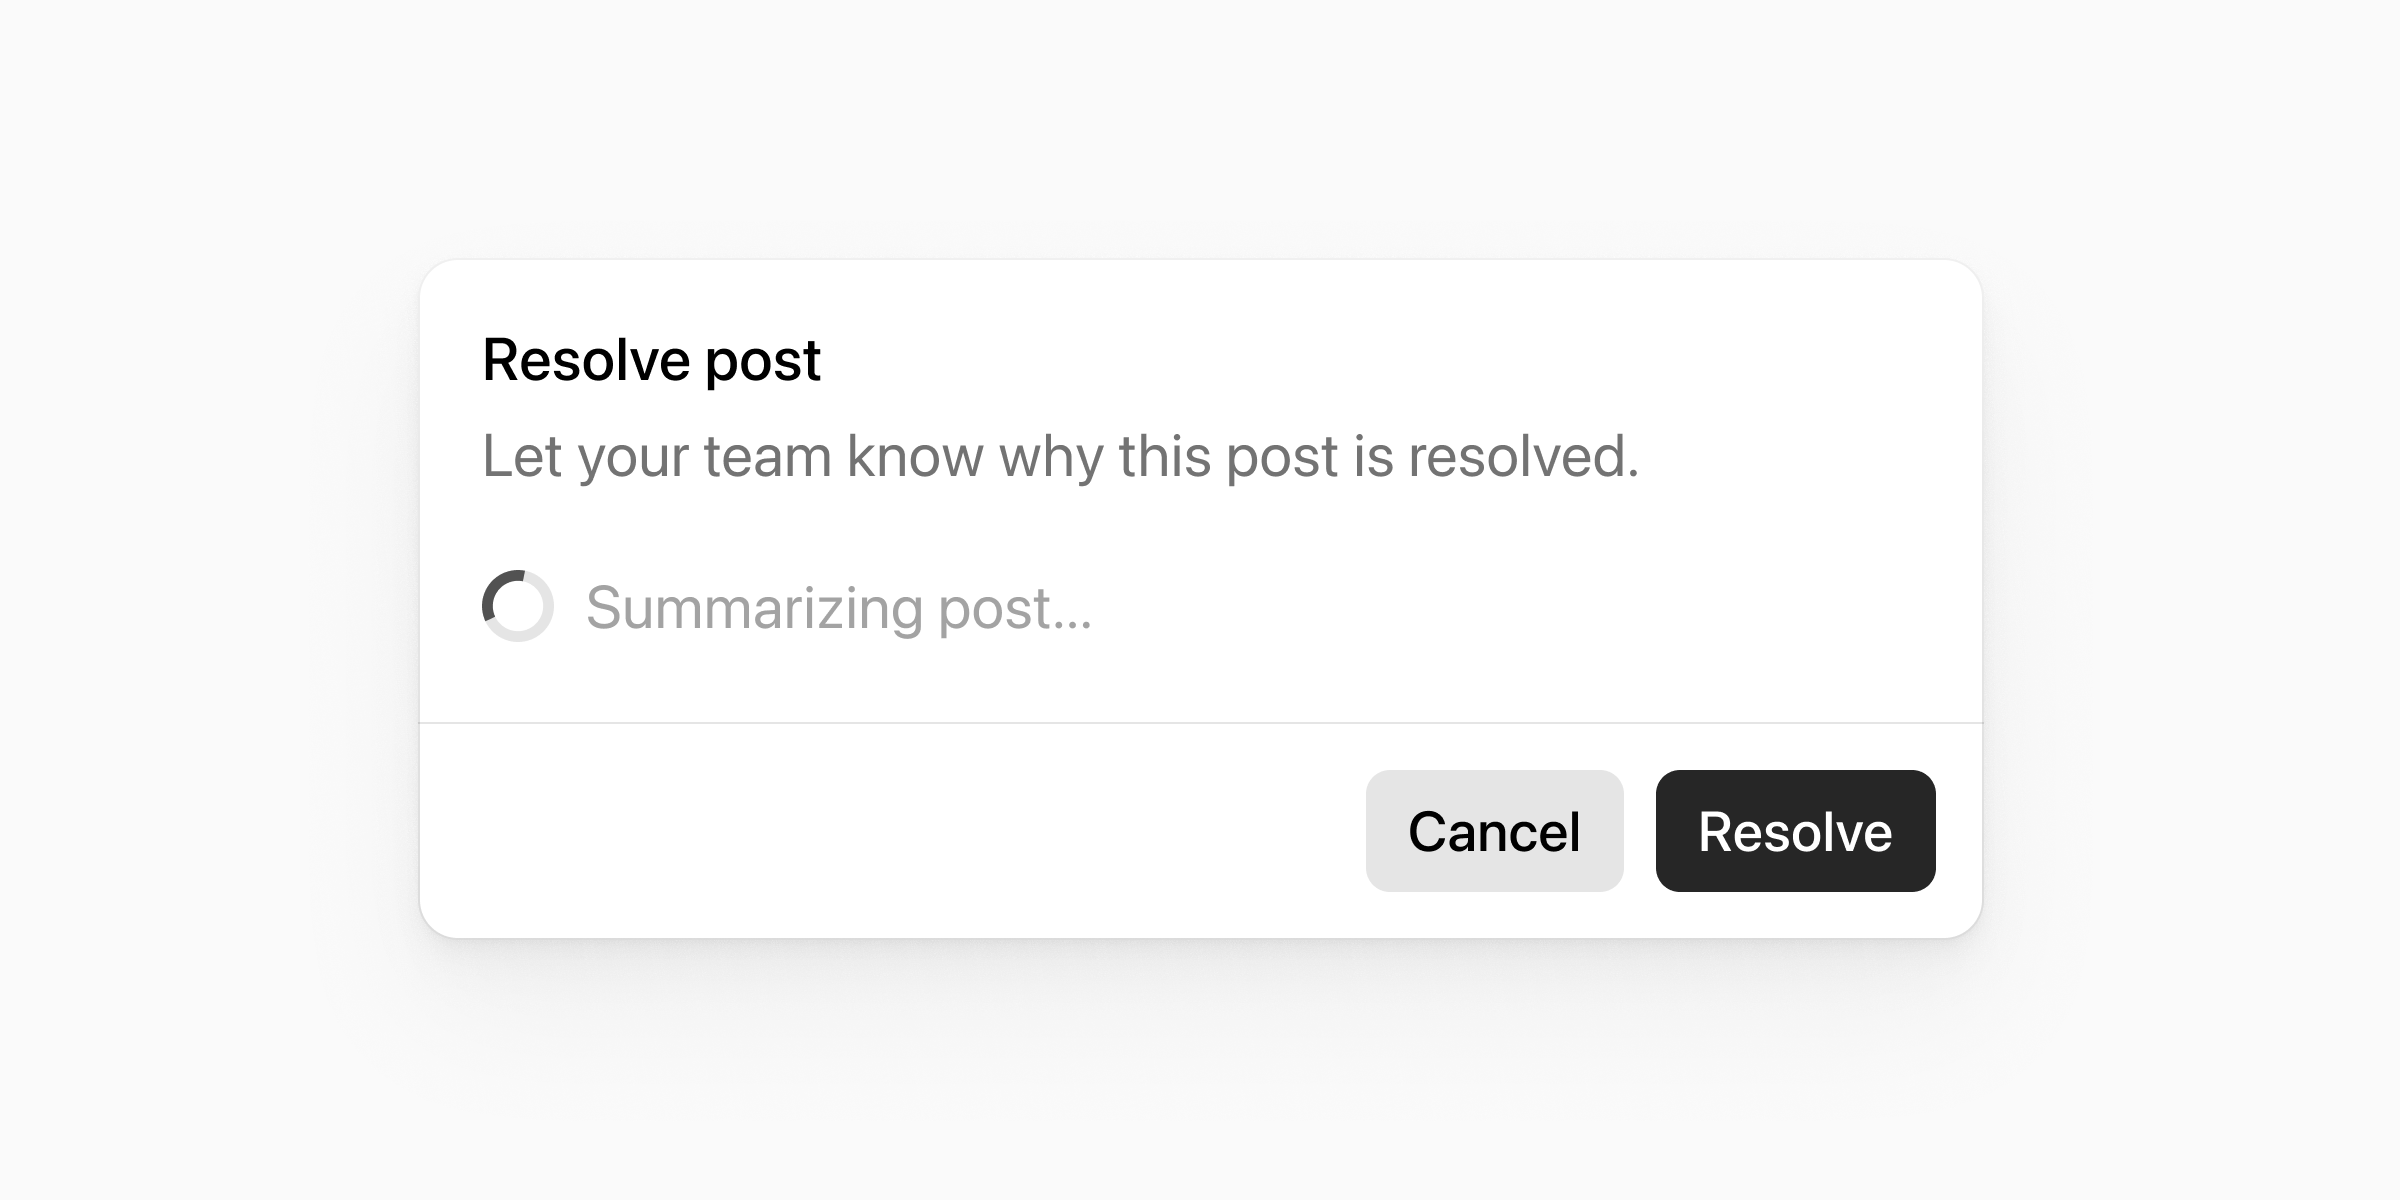 automatically summarize posts into decisions and action items